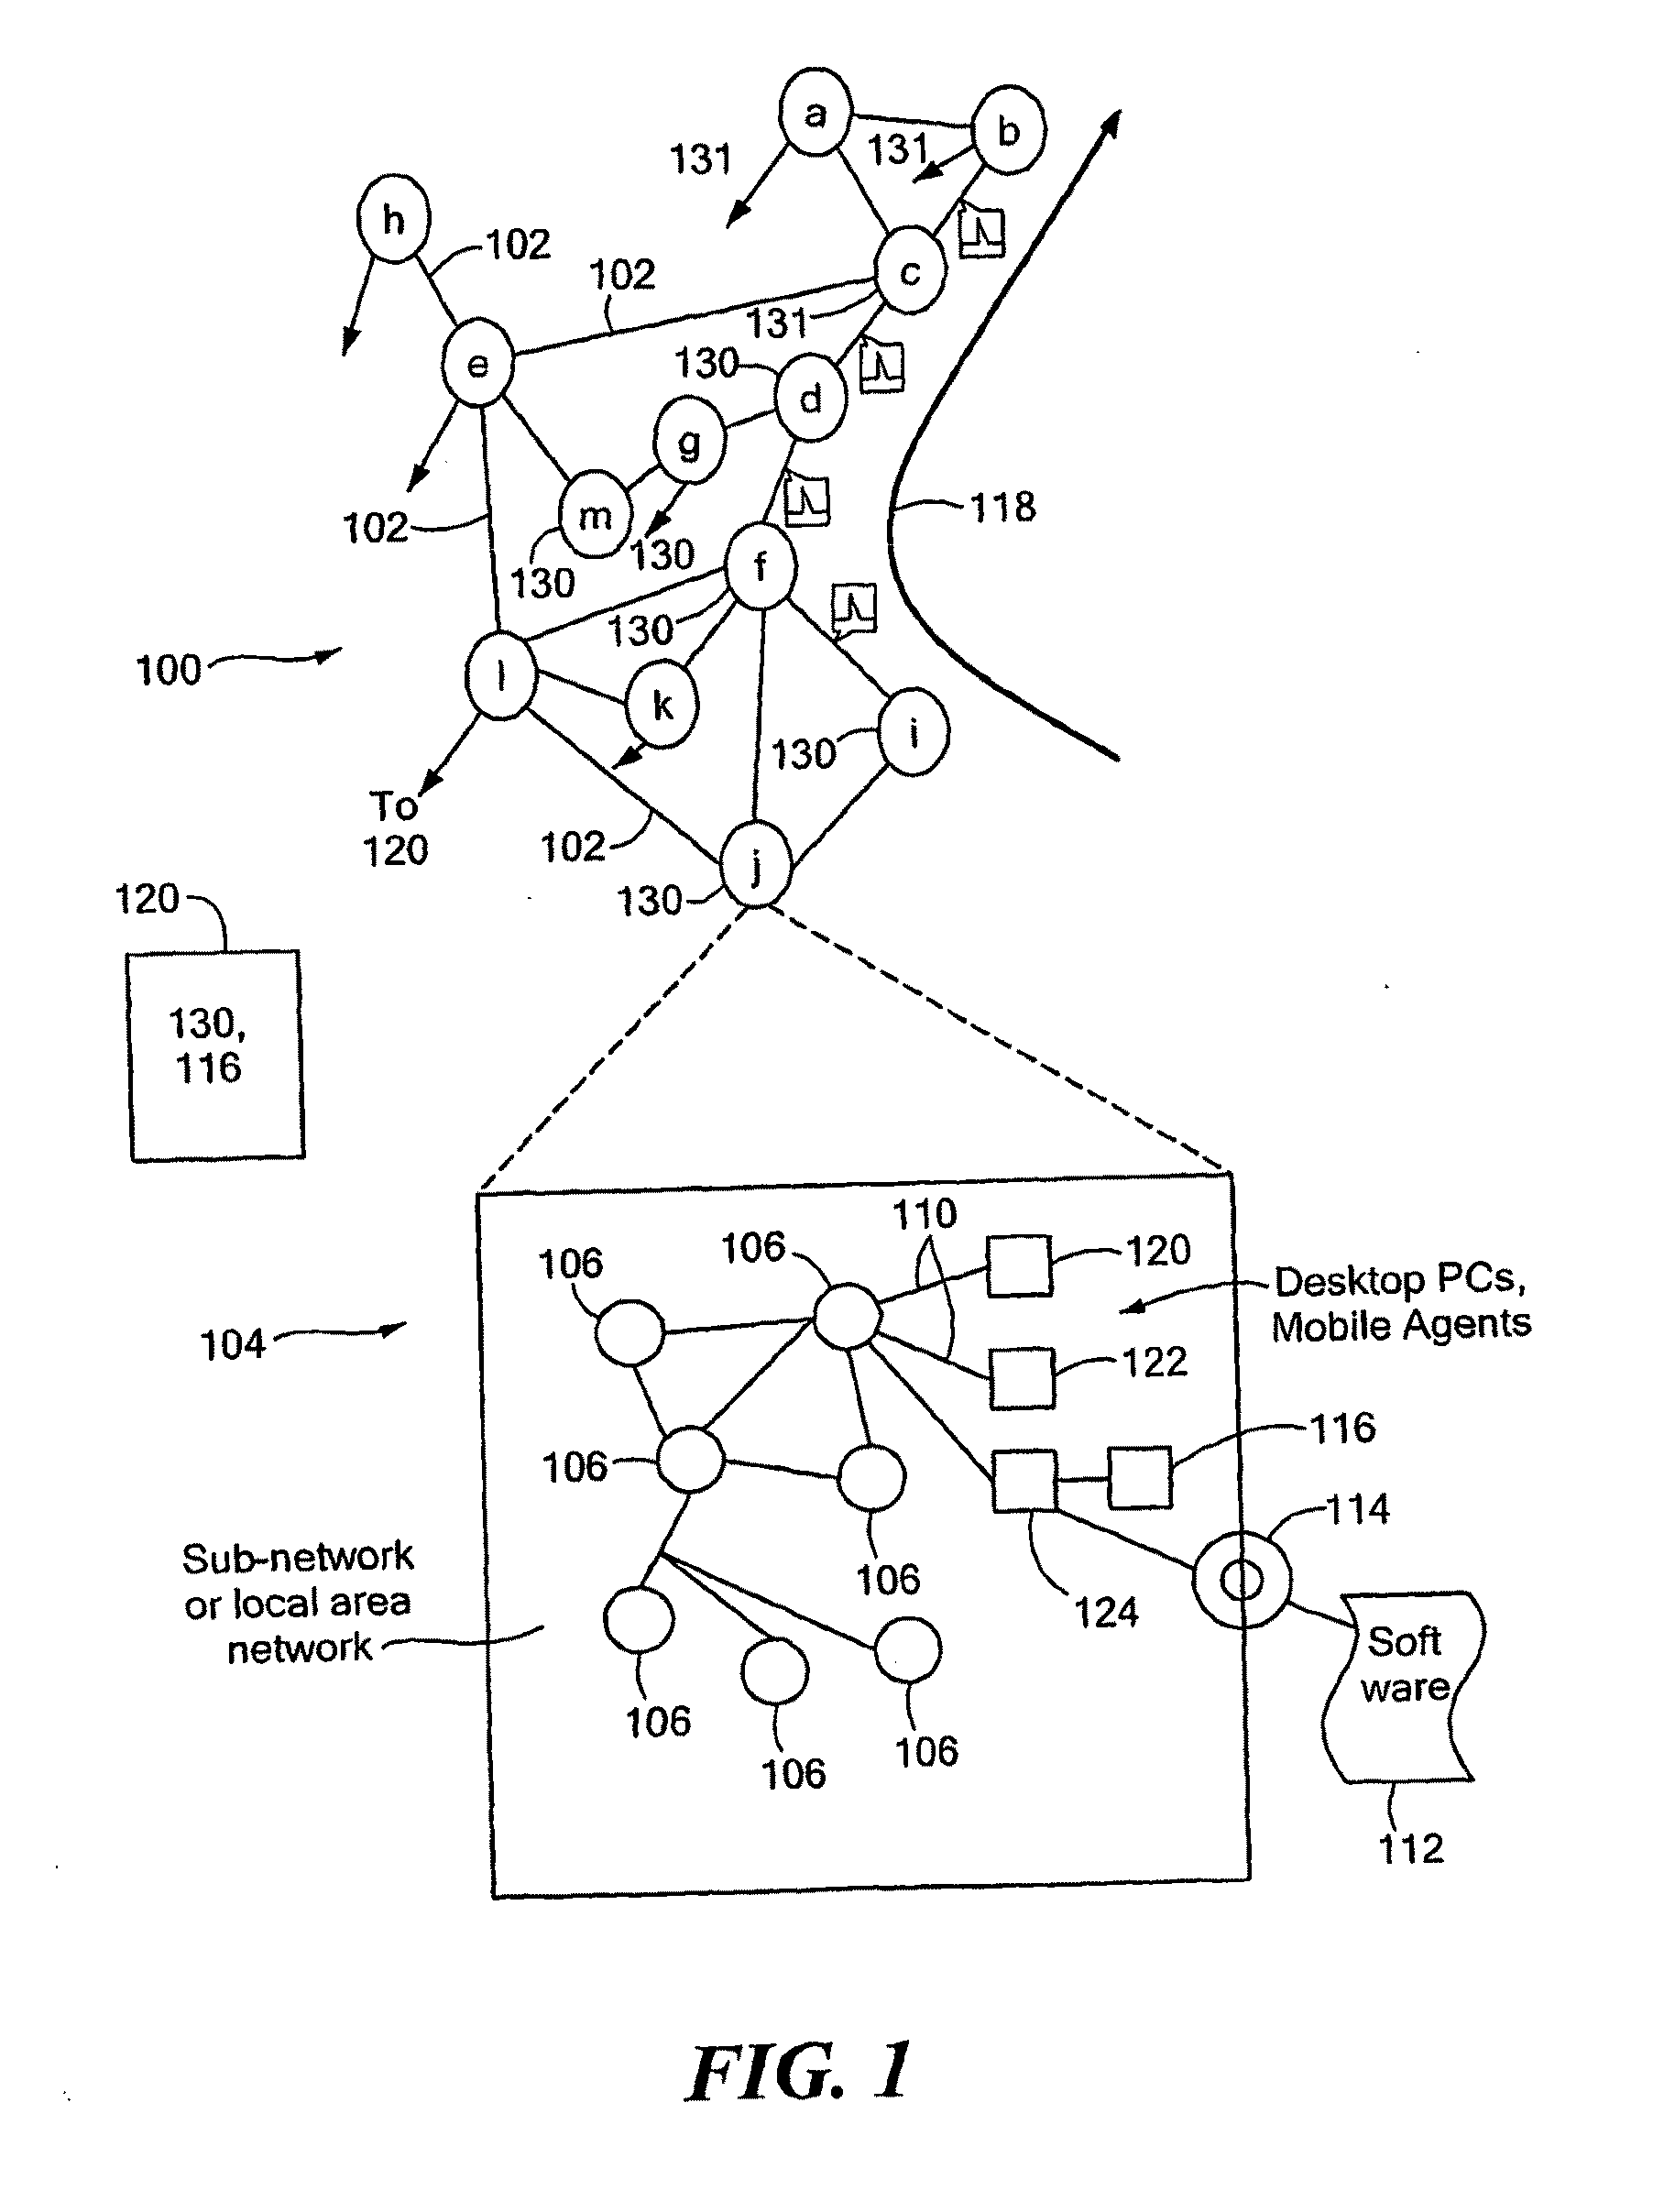 Method and Apparatus for Whole-Network Anomaly Diagnosis and Method to Detect and Classify Network Anomalies Using Traffic Feature Distributions